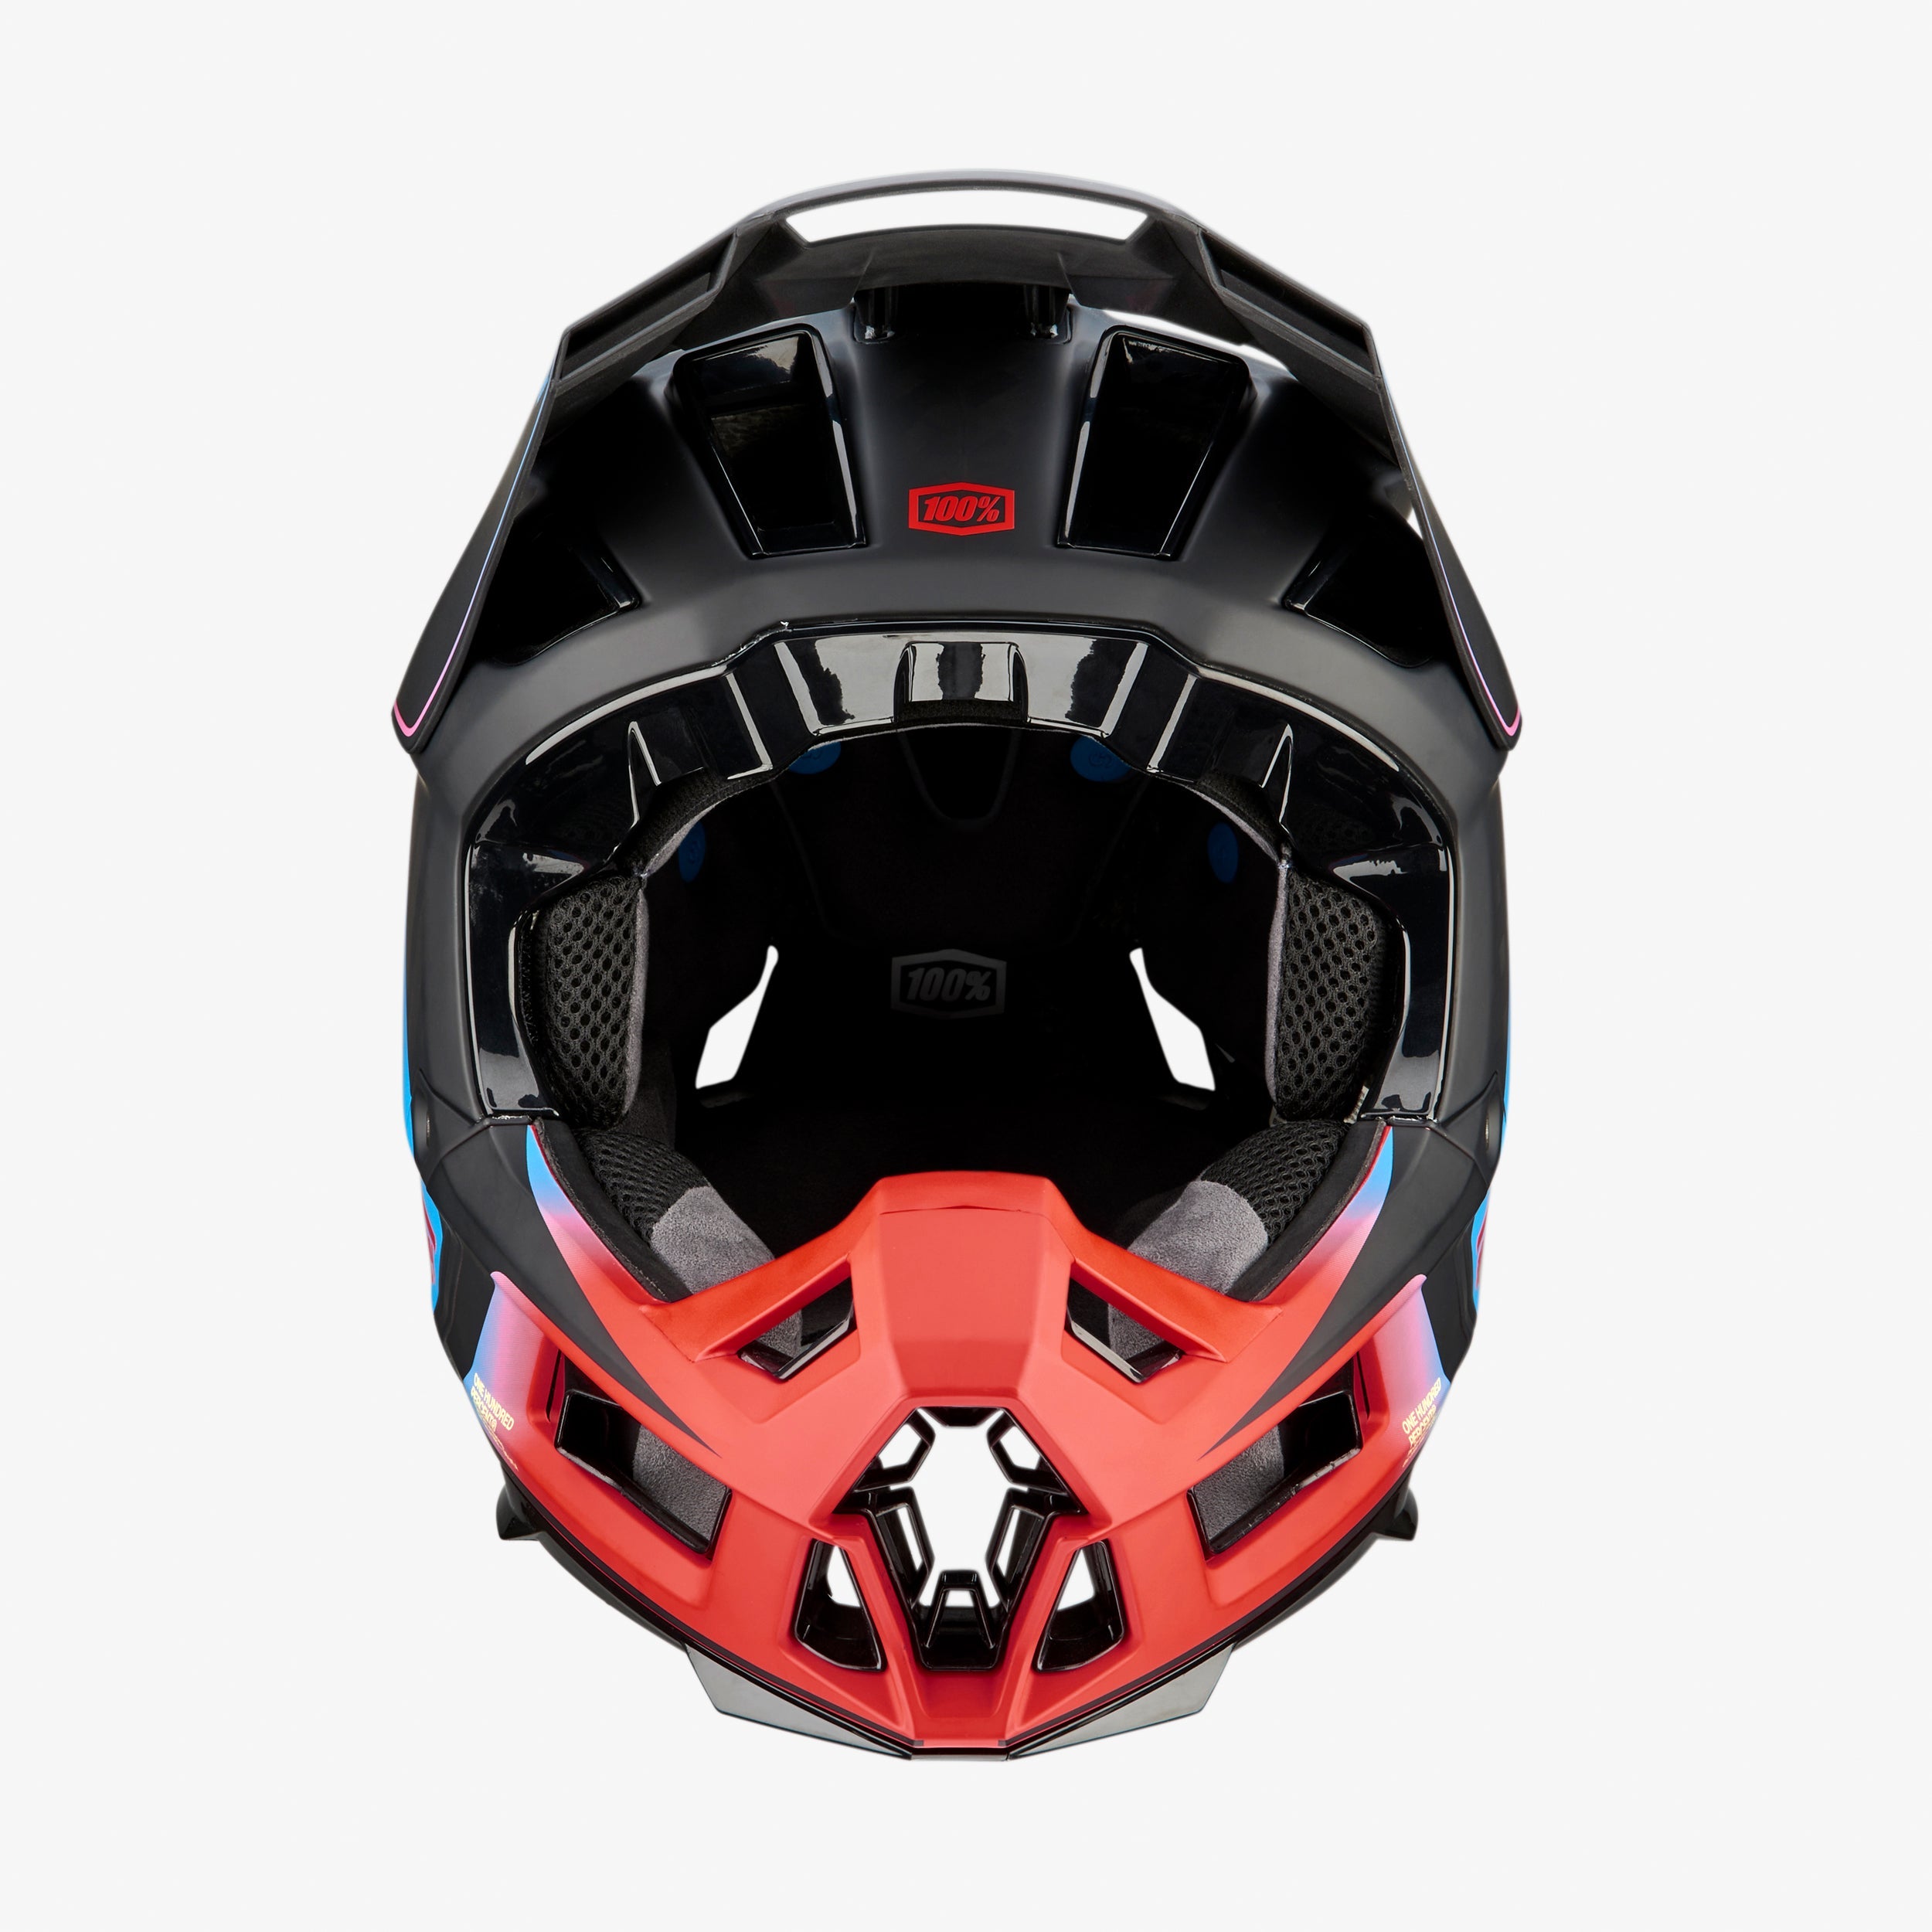 AIRCRAFT 2 Helmet Carbon Steel Blue/Neon Red - Secondary